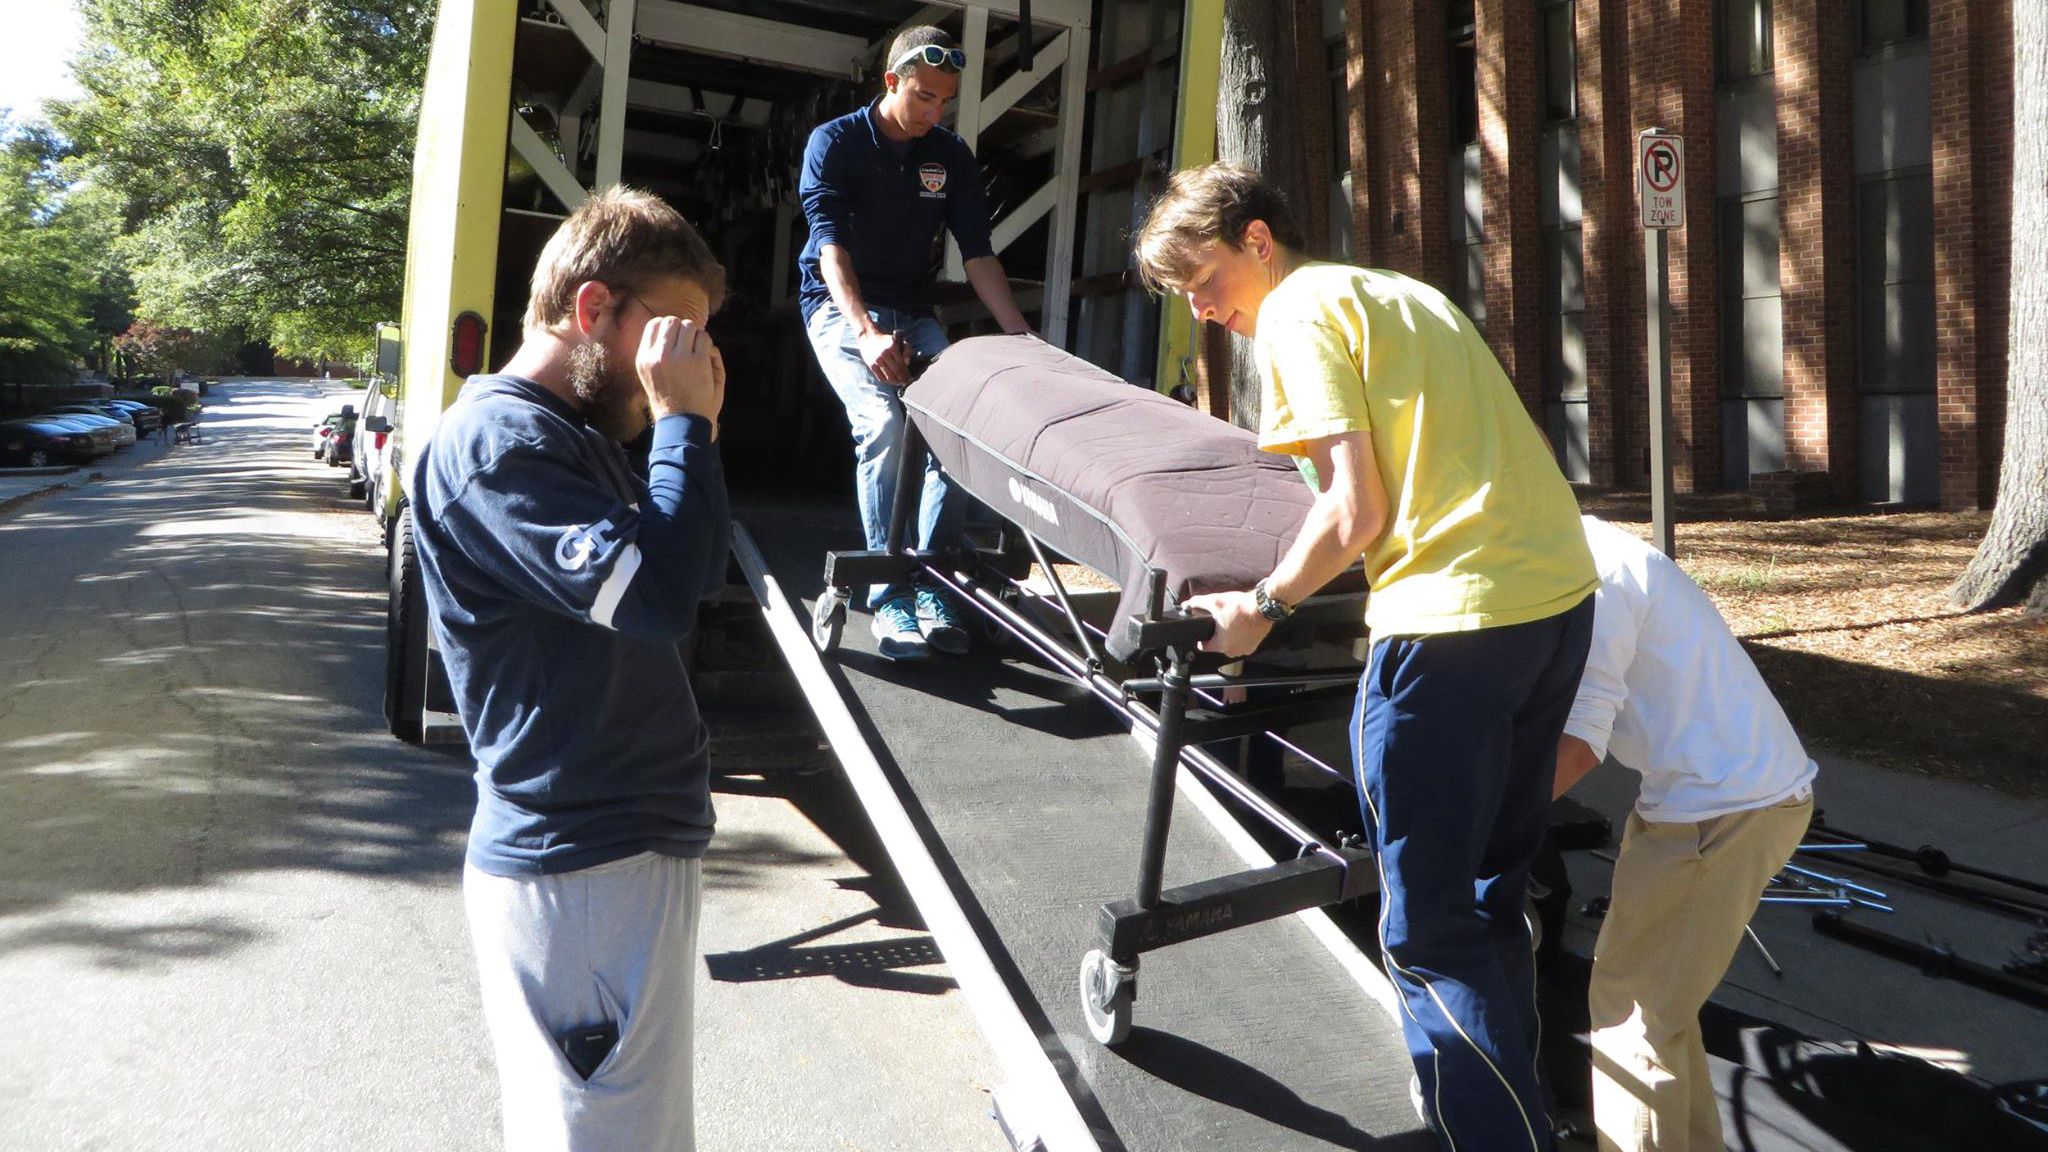 A group of students unloading a marimba after a gig.